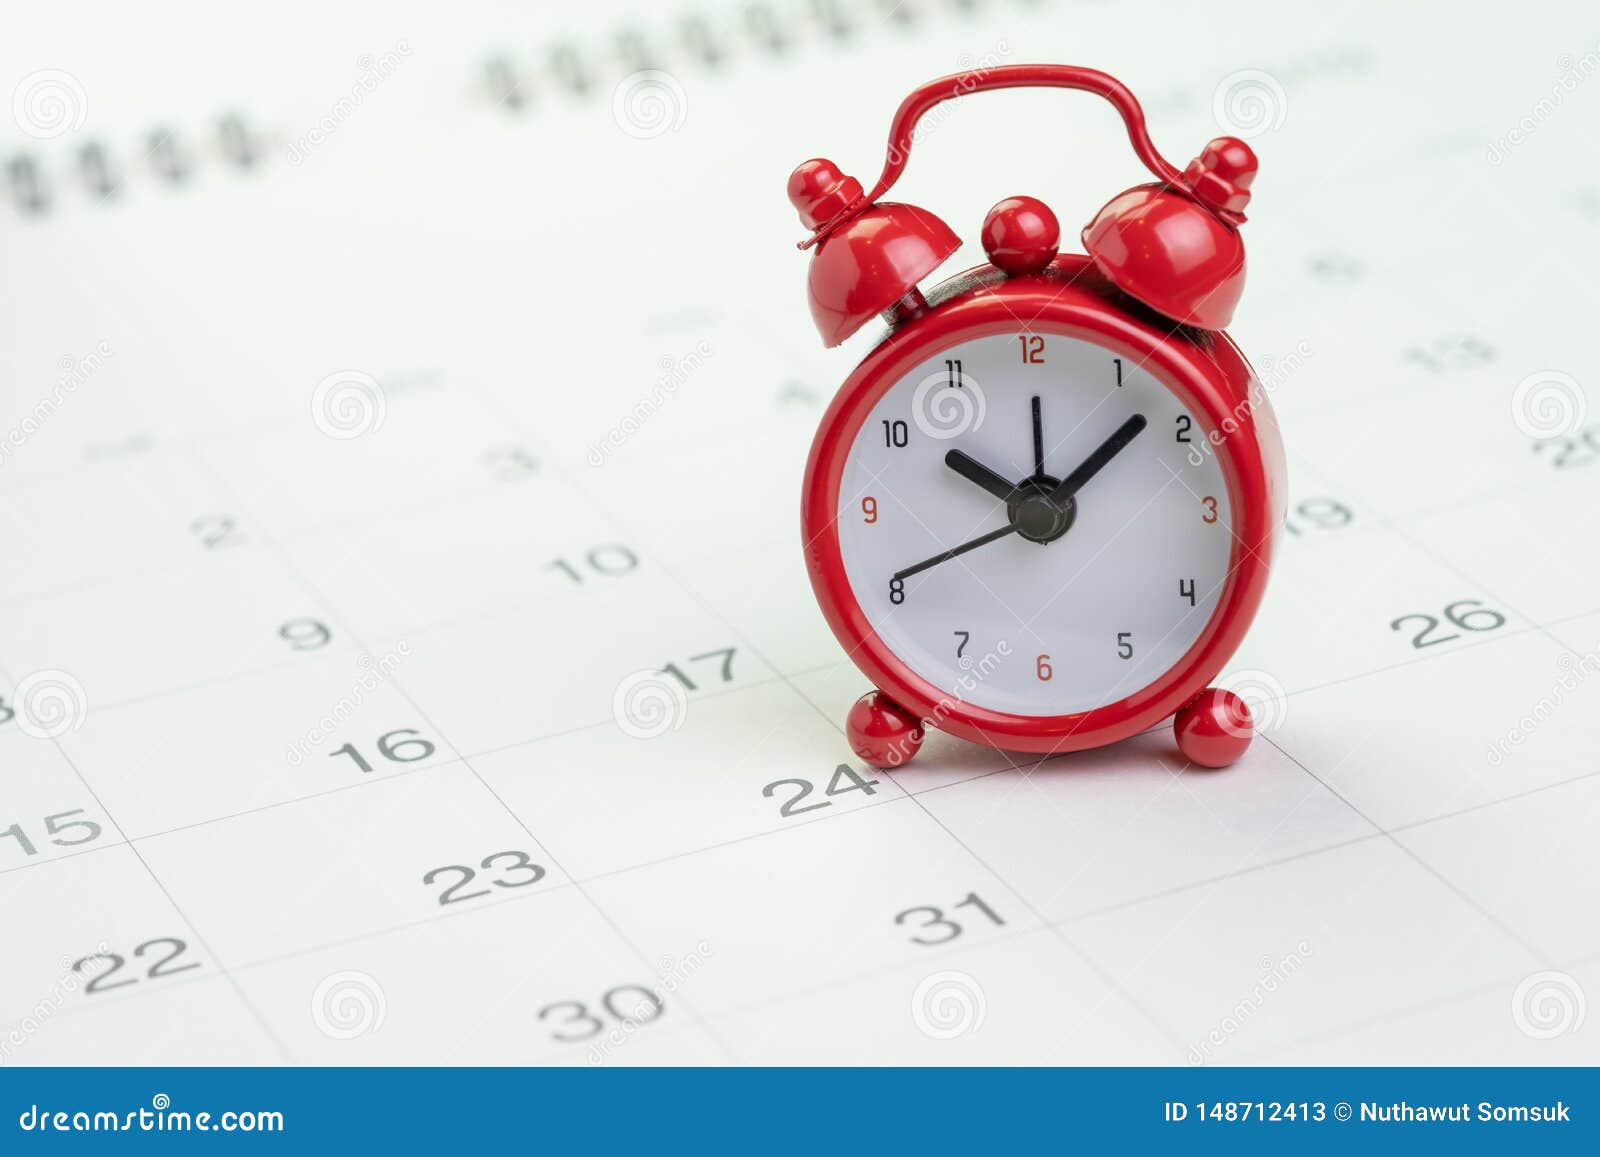 date and time reminder or deadline concept, small red alarm clock on white clean calendar with number of day, counting down to